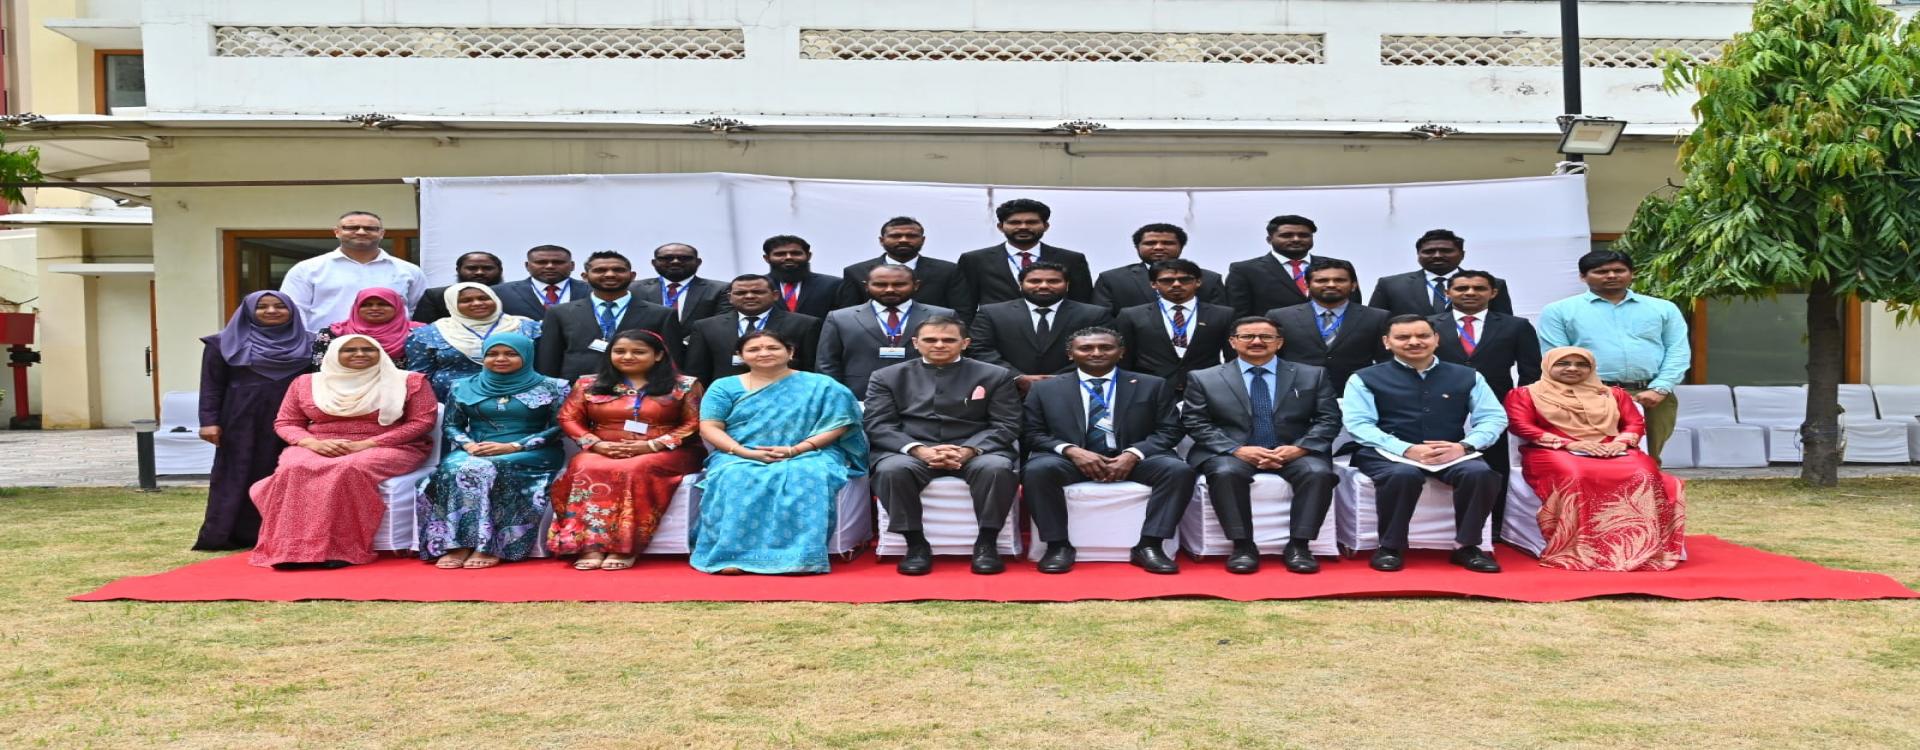 Inaugural Ceremony of the 14th Capacity Building Programme in Field Administration for the Senior Civil Servants of Maldives